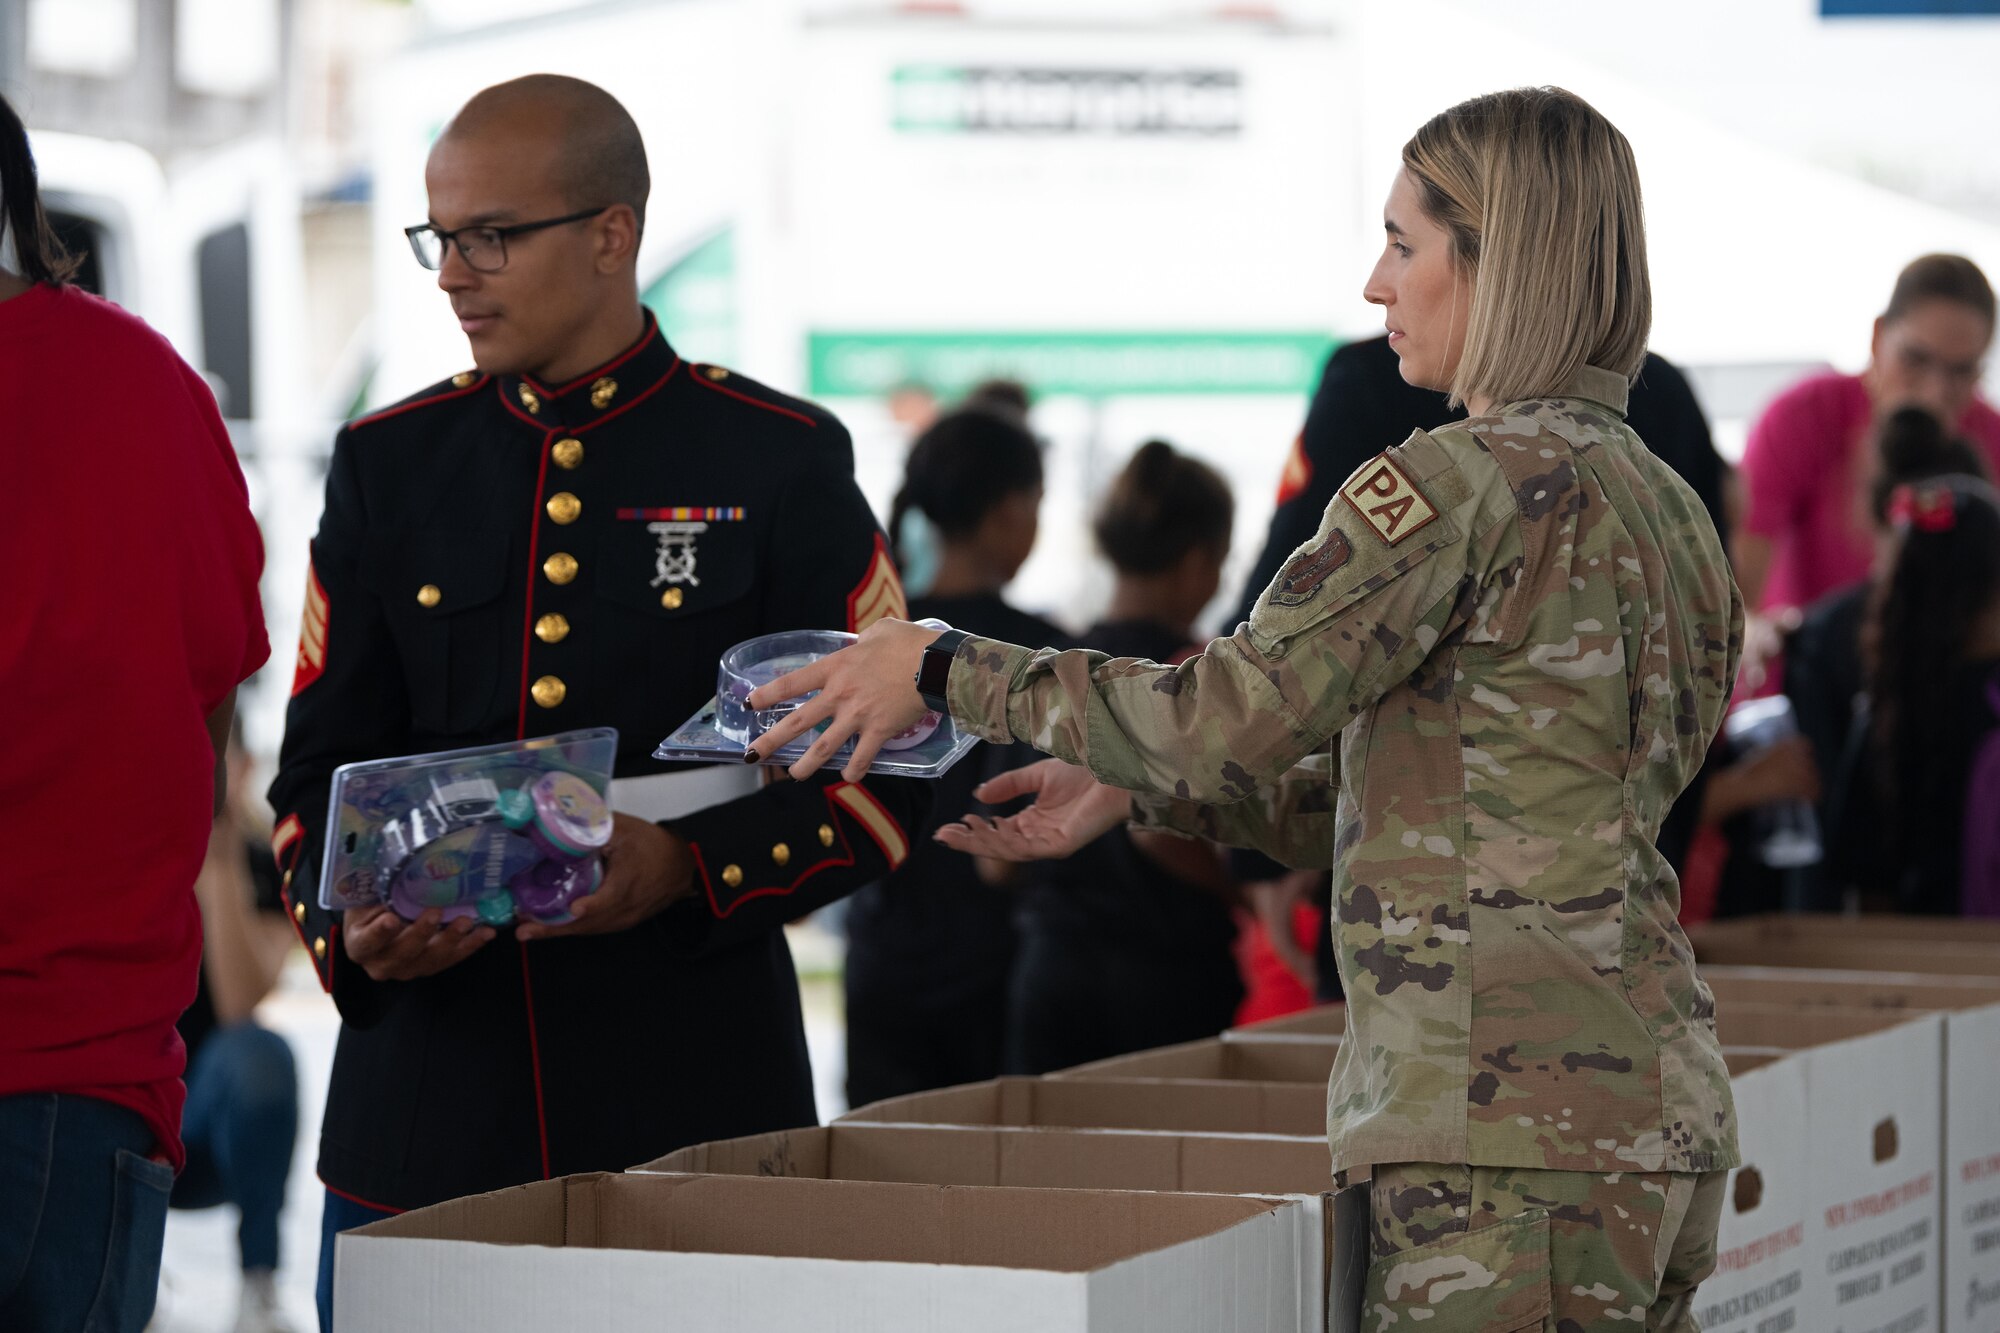 U.S Marine Corps Sgt. Yadiel Burgos Benitez, a Toys for Tots coordinator, assigned to Det. 1 Landing Support Company, Combat Logistics Regiment 45, 4th Marine Logistics Group, and  U.S. Air Force Airman 1st Class Victoria Jewett, a public affairs specialist with the 156th Wing, delivers toys to children at during a toy distribution at Dr. Julio Henna Elementary School, San Juan, Puerto Rico, Dec. 14, 2023. The event was part of the campaign with Toys for Tots, where PRANG members partnered with Marines to distribute more than 200 toys to children at a local school. (U.S. Air National Guard photo by Airman 1st Class Gisselle Toro-Caraballo)